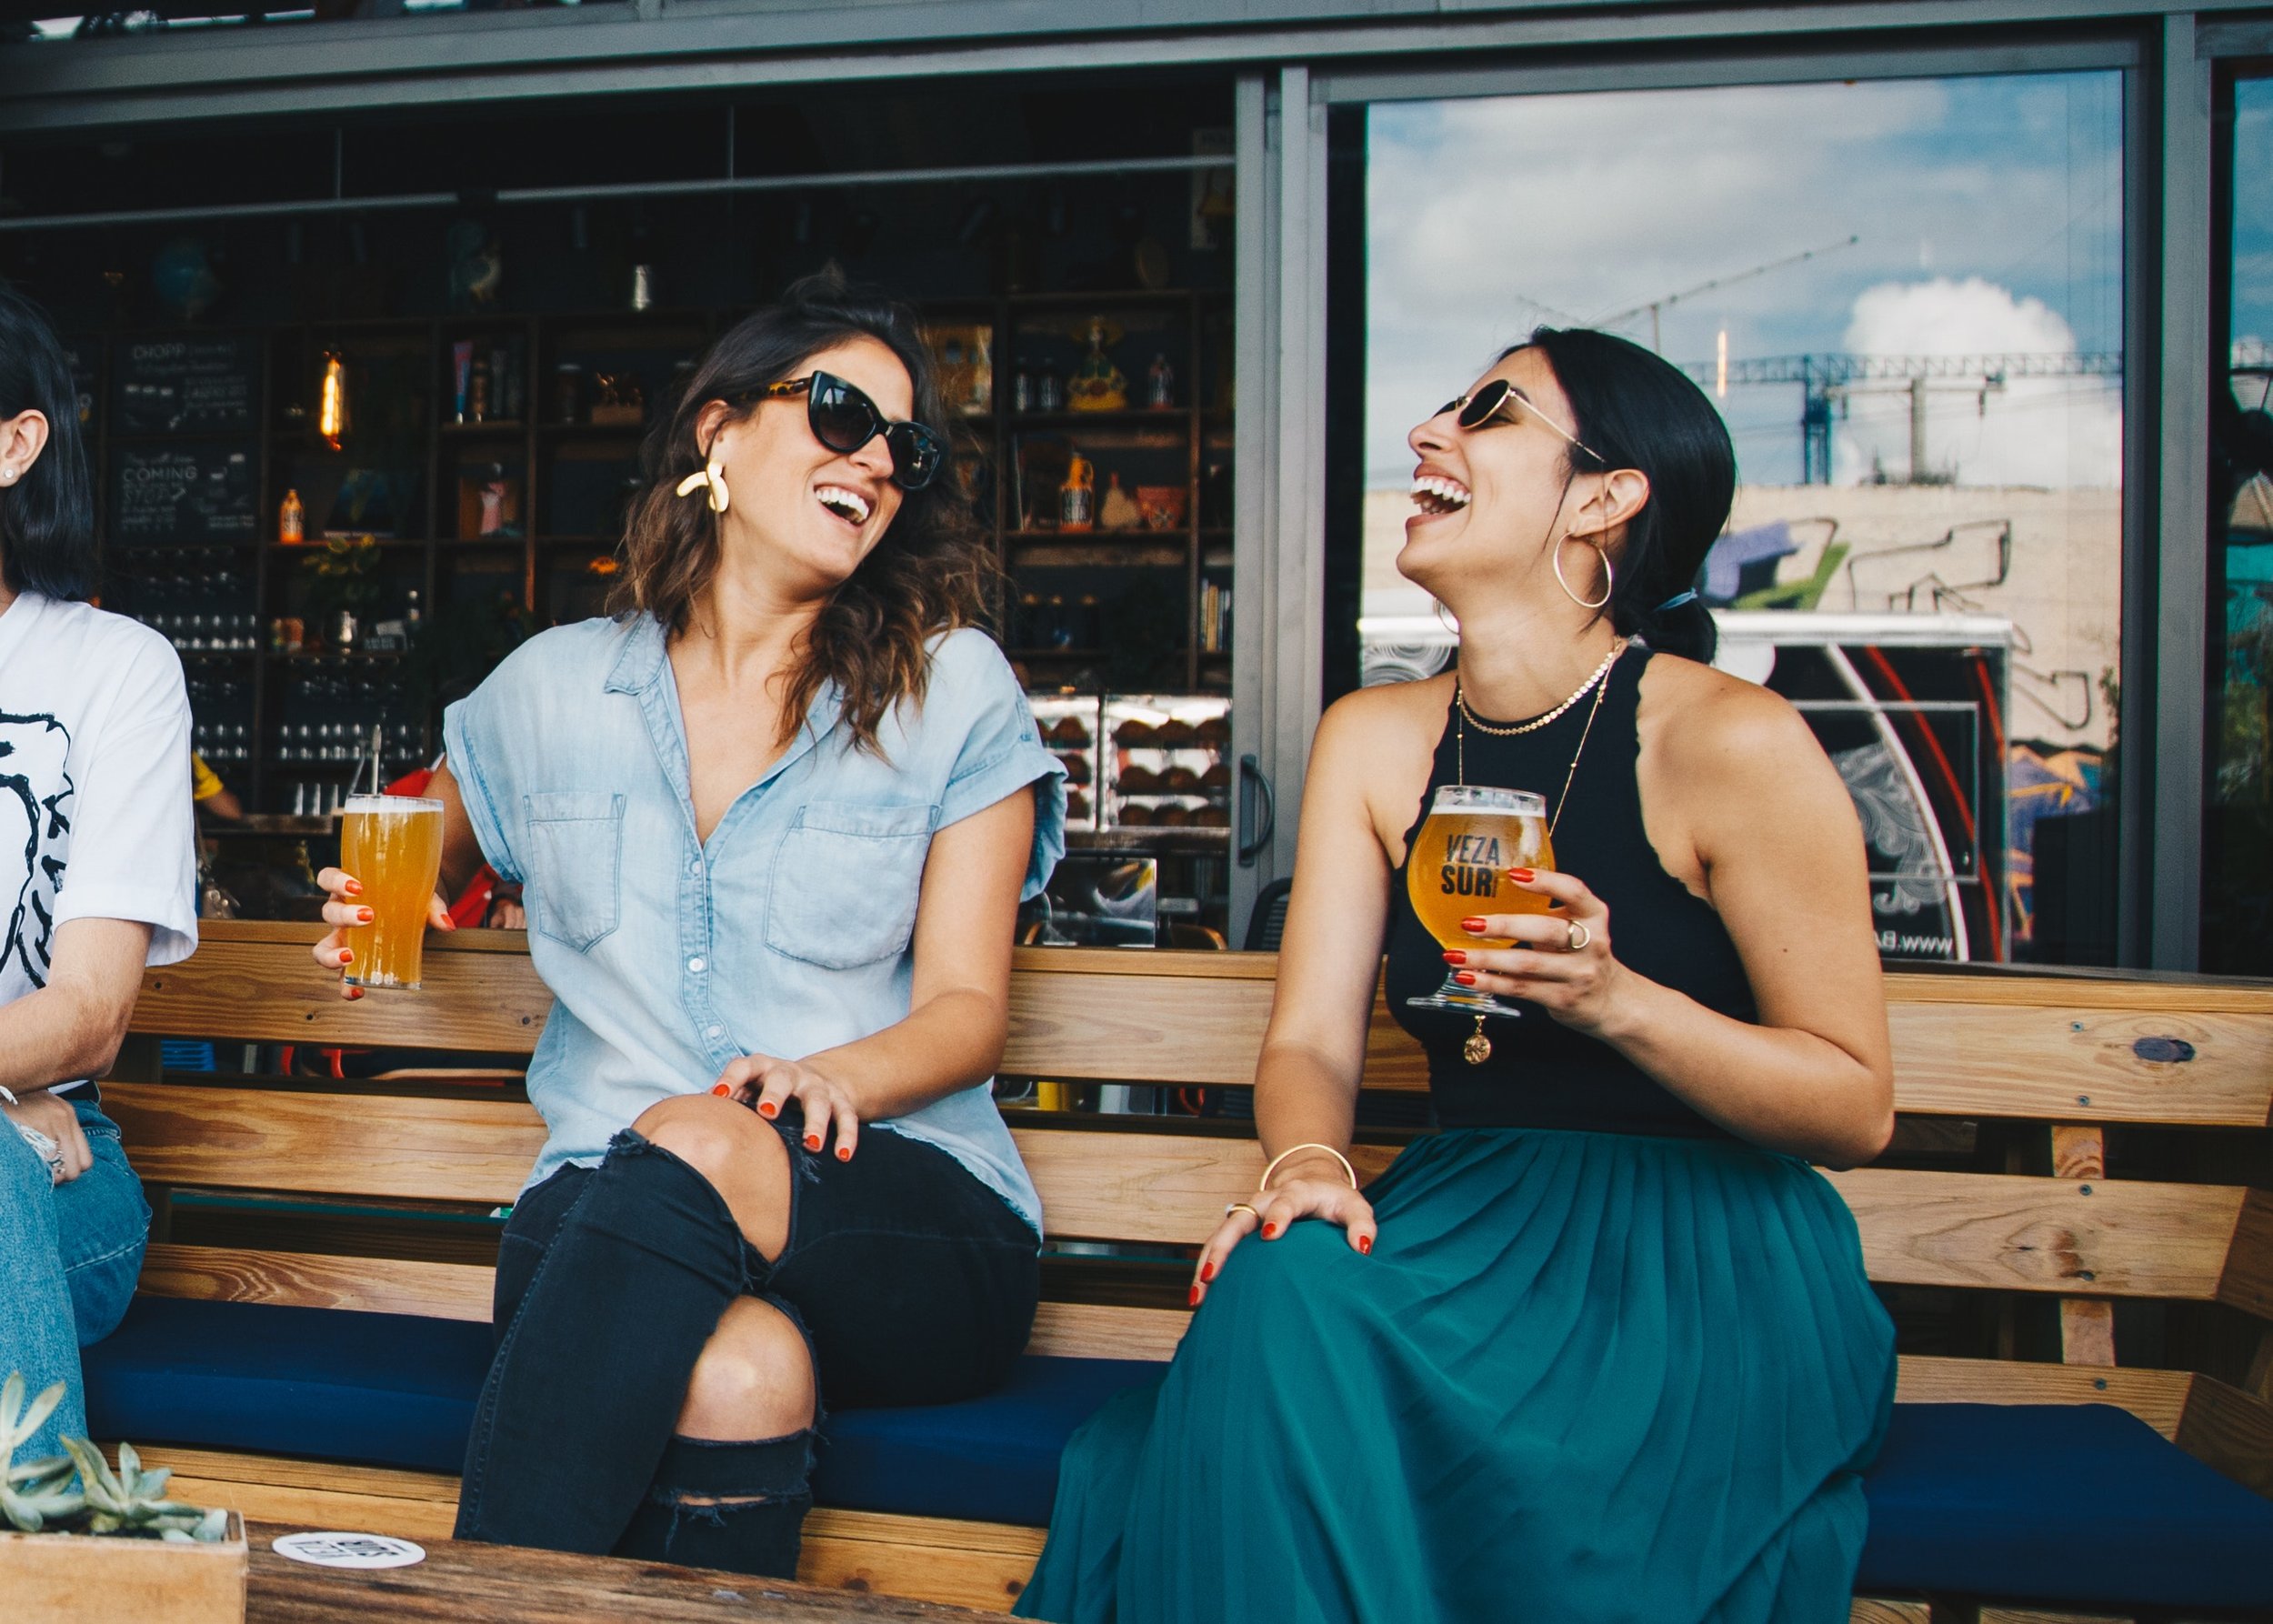 Women drinking beer sold as an Add-on at beer festival